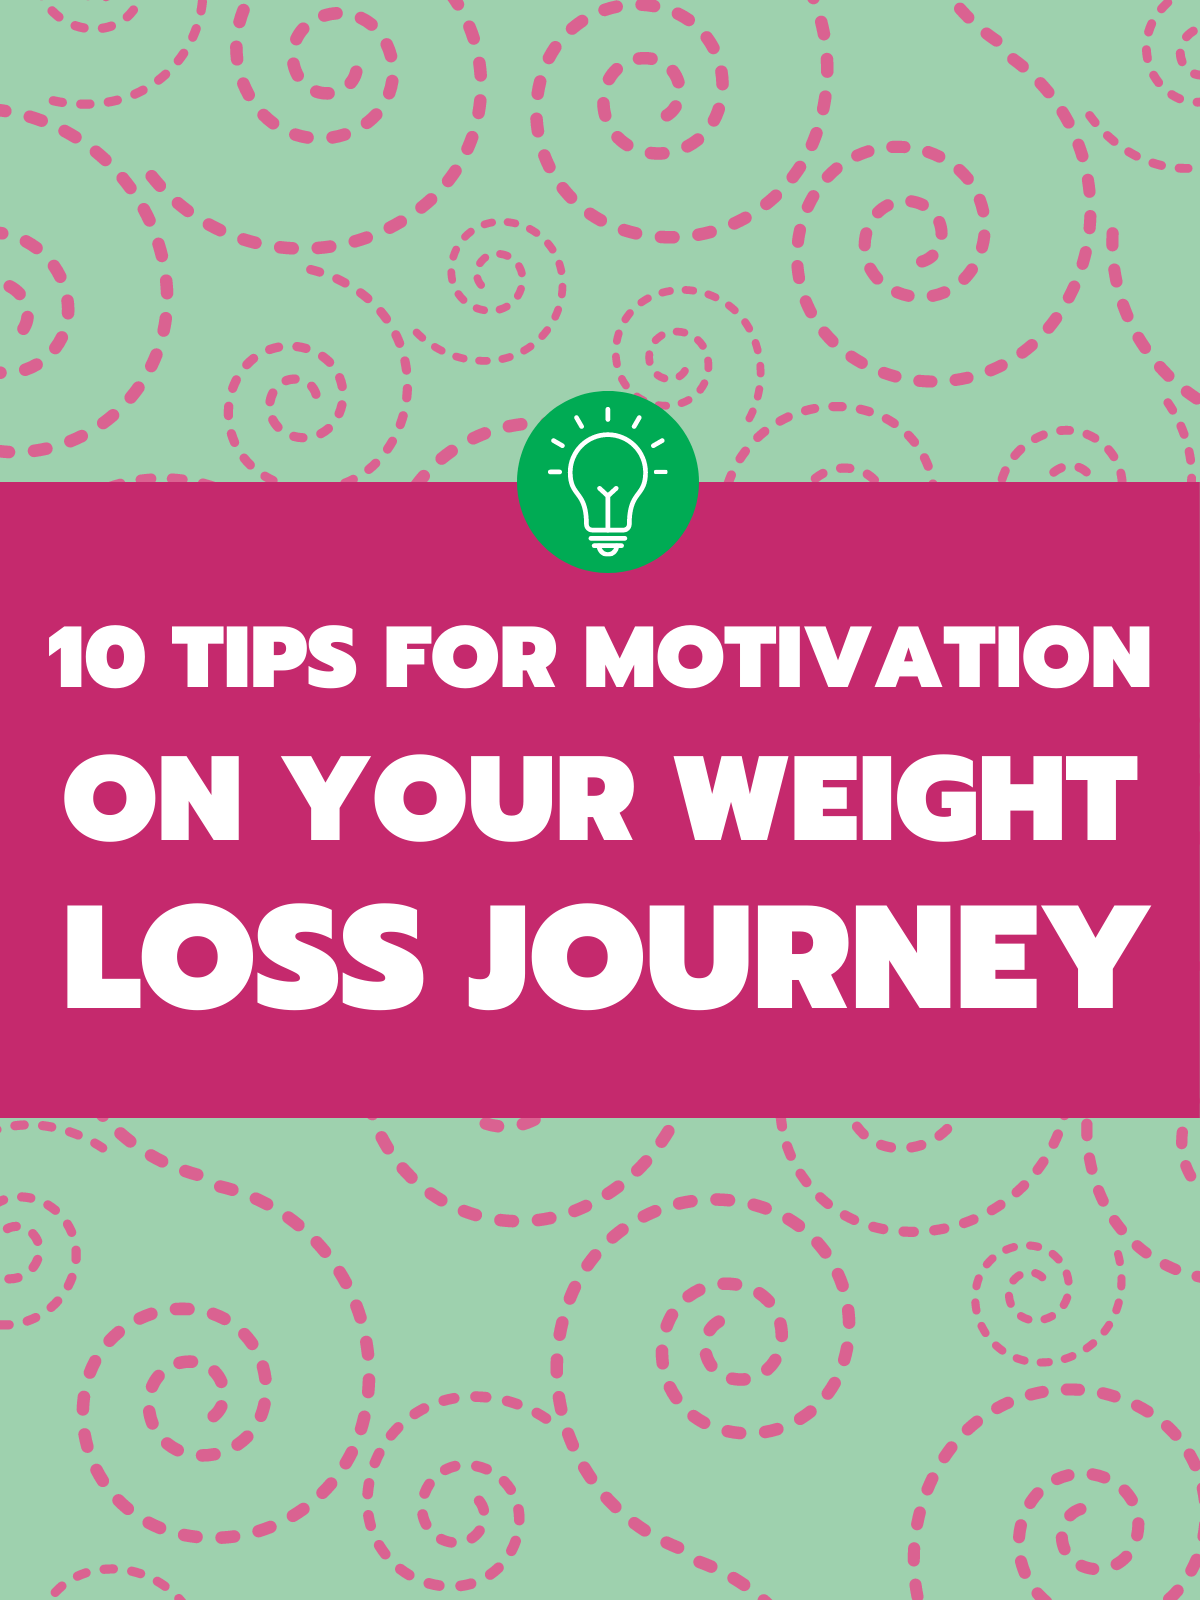 10 tips for motivation on your weight loss journey in white text on a pink box with swirling pink and light pale green background